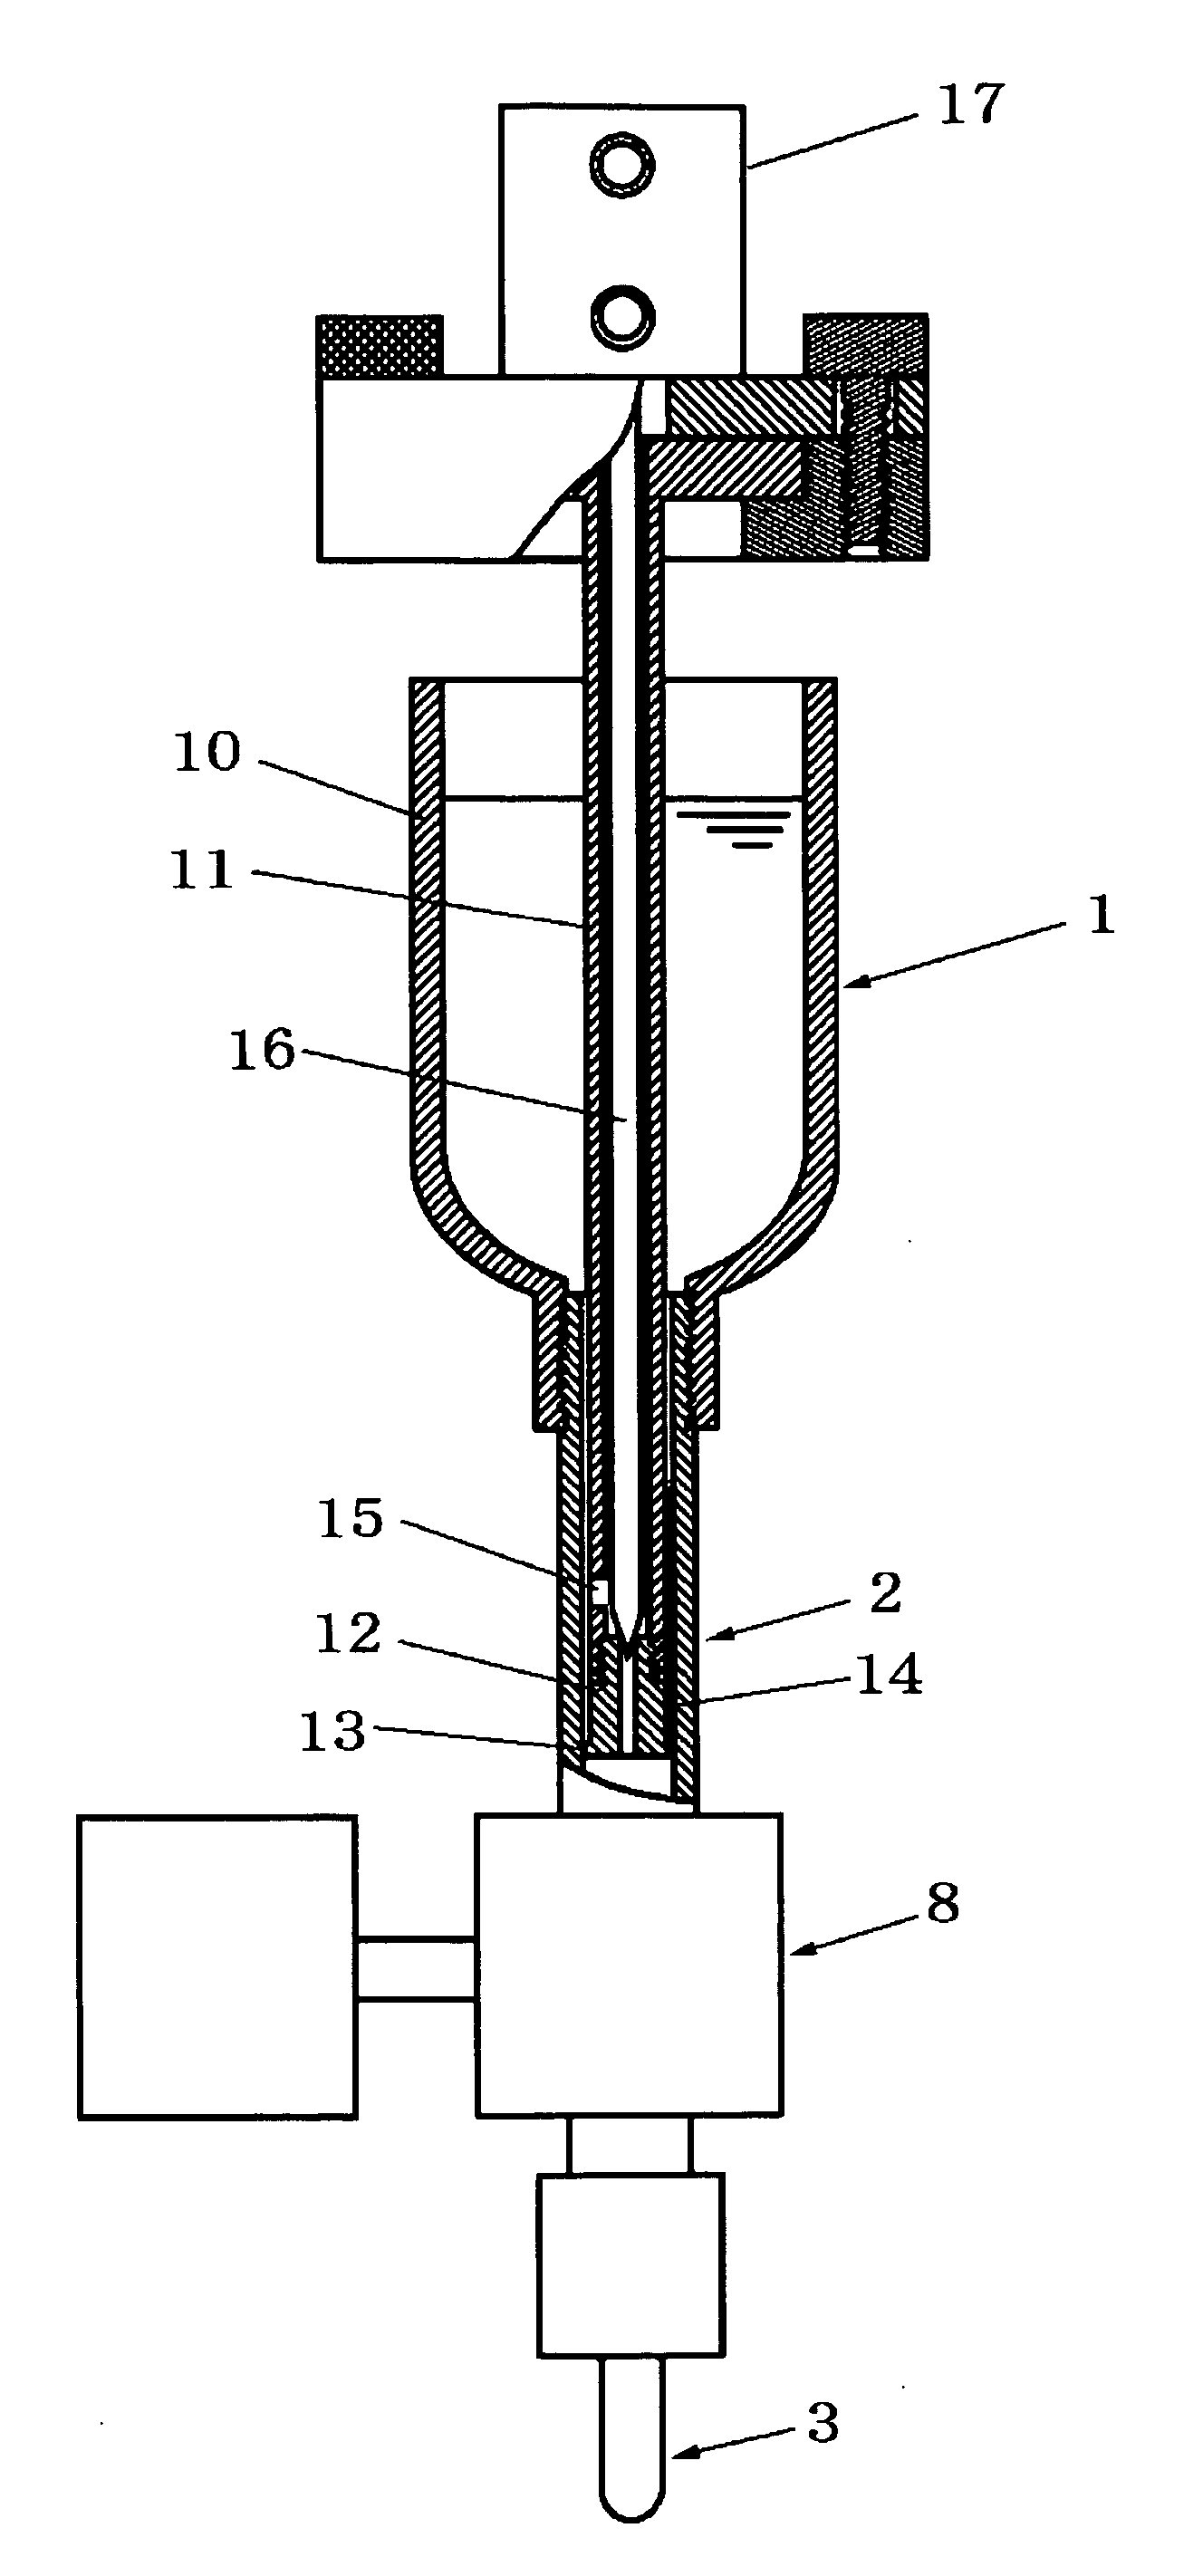 Liquid material delivering method and device therefor